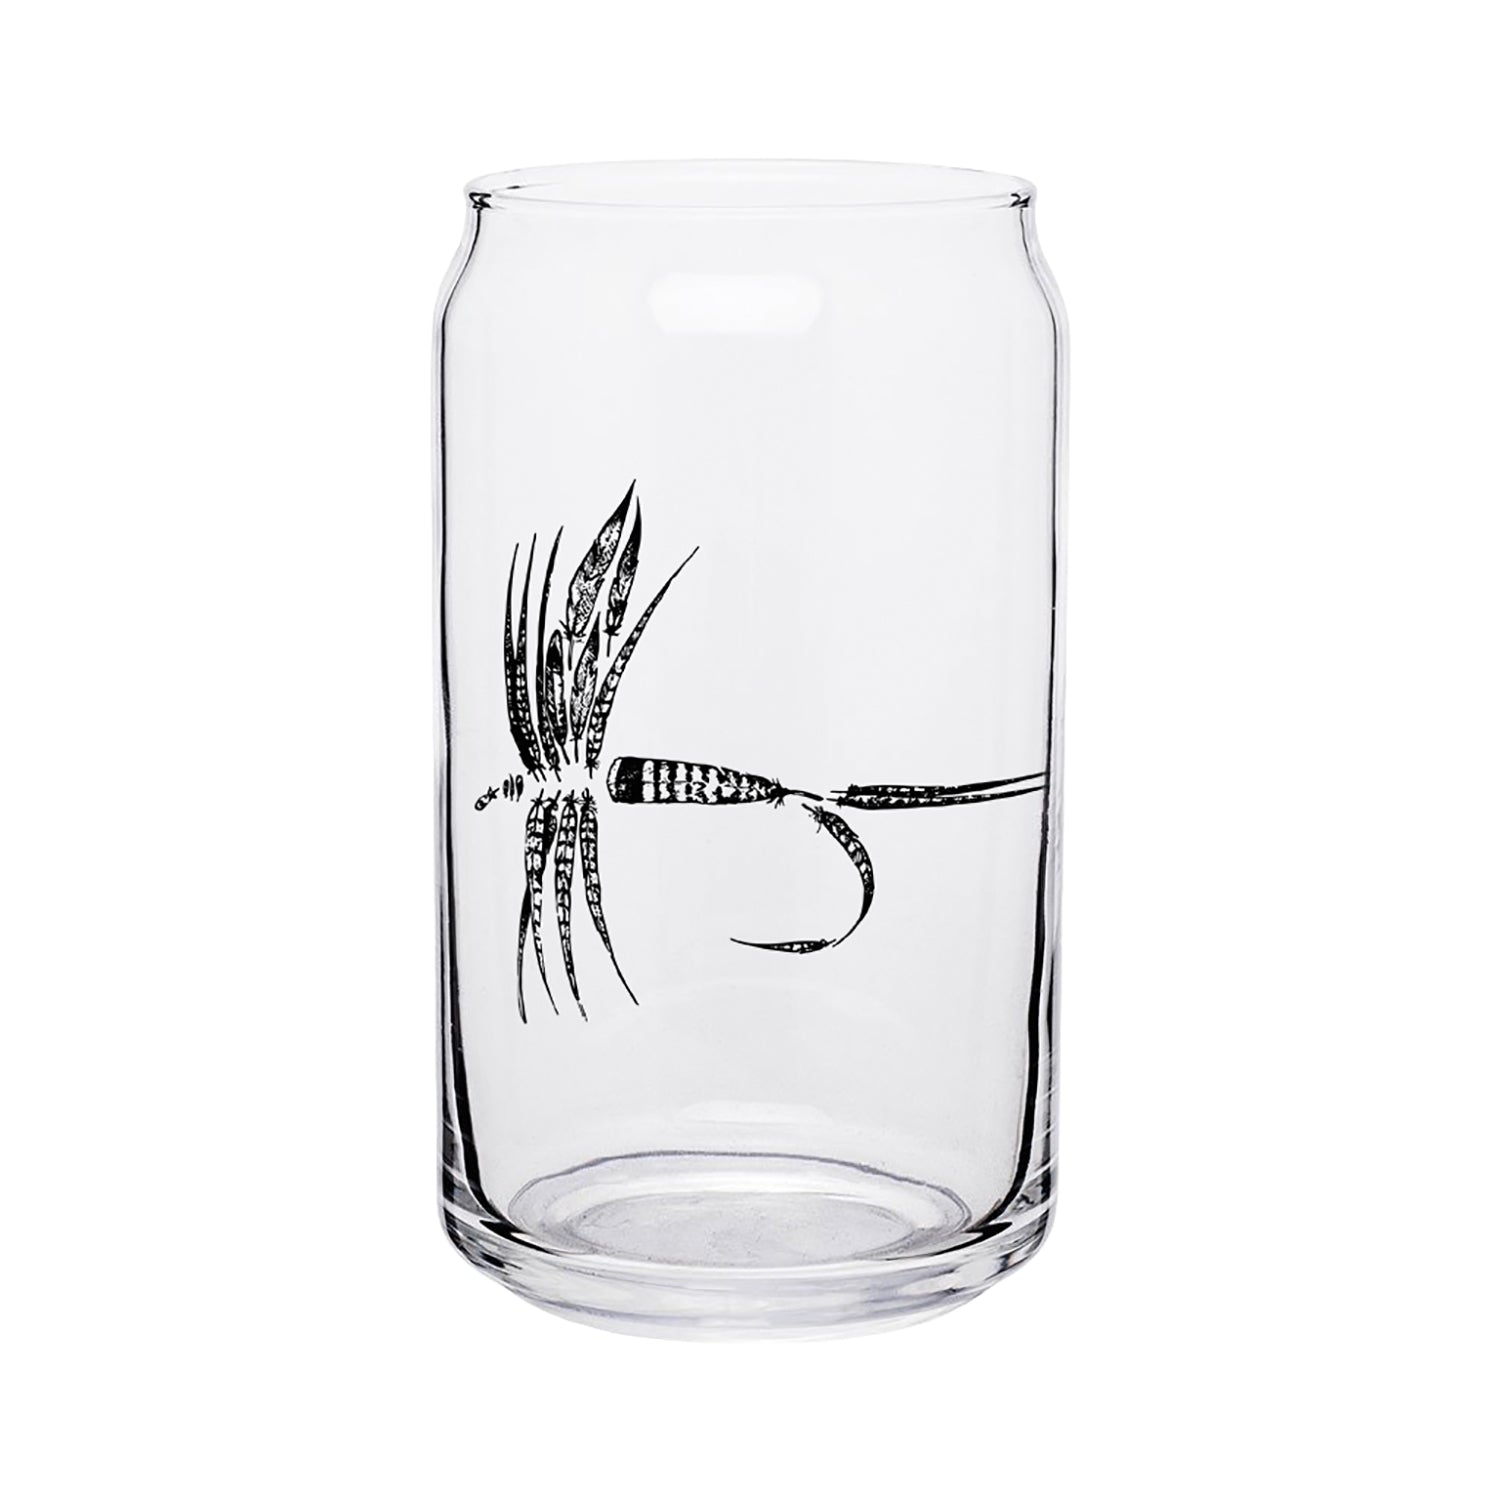 Beer can shaped glass with a dry fly made up of feathers in black ink